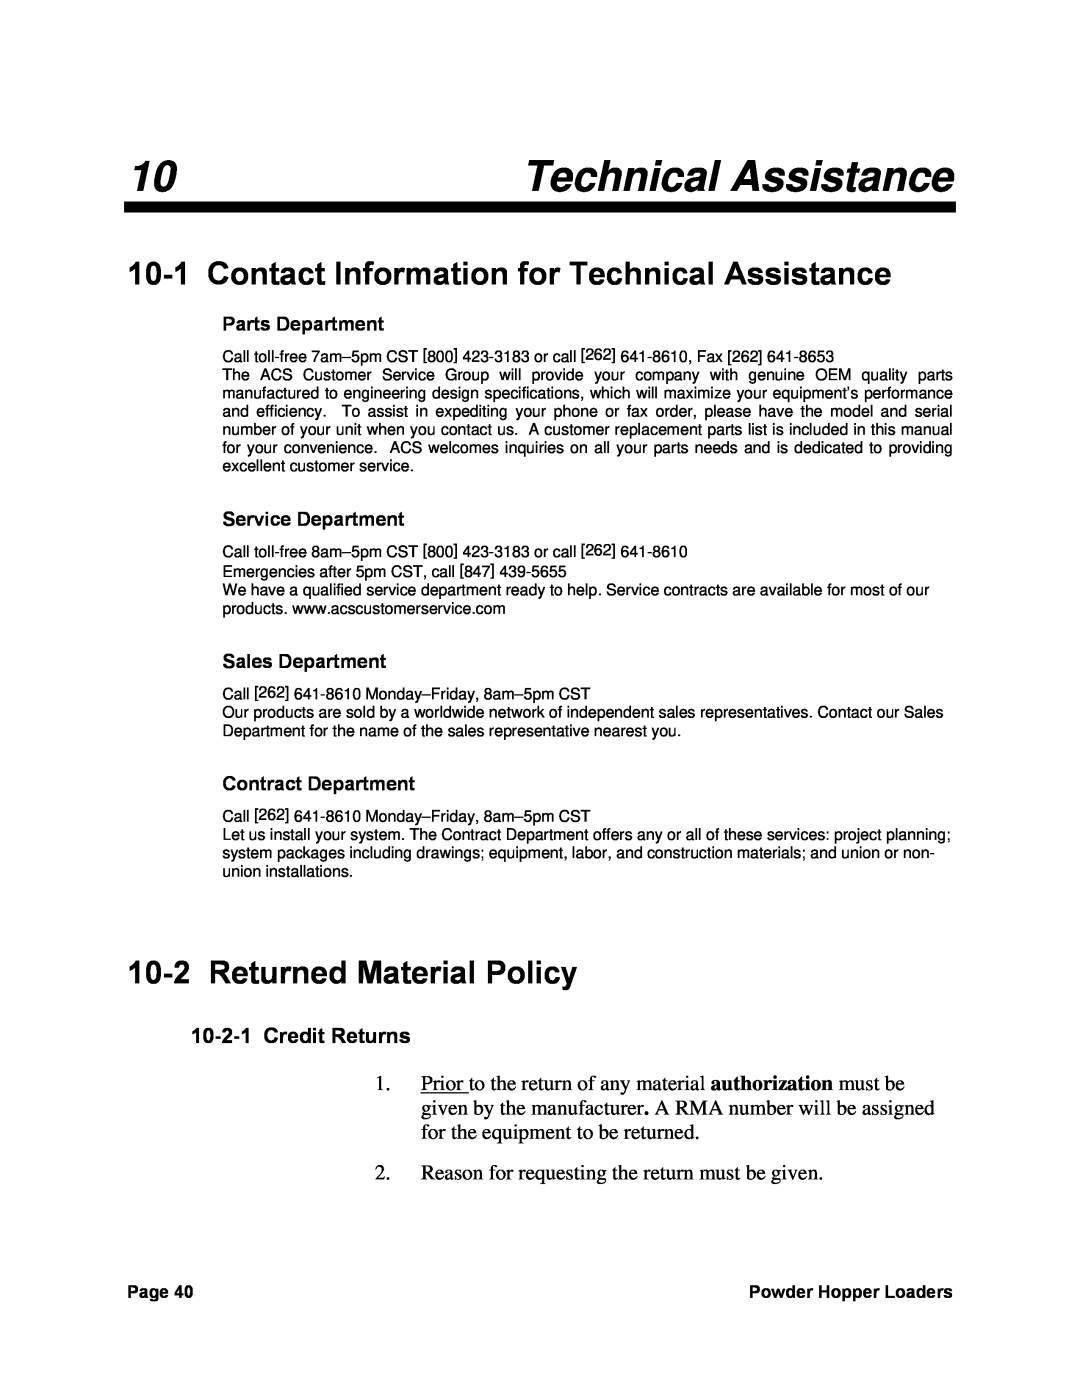 Sterling 0, 882, 238 manual Contact Information for Technical Assistance, Returned Material Policy, Credit Returns 